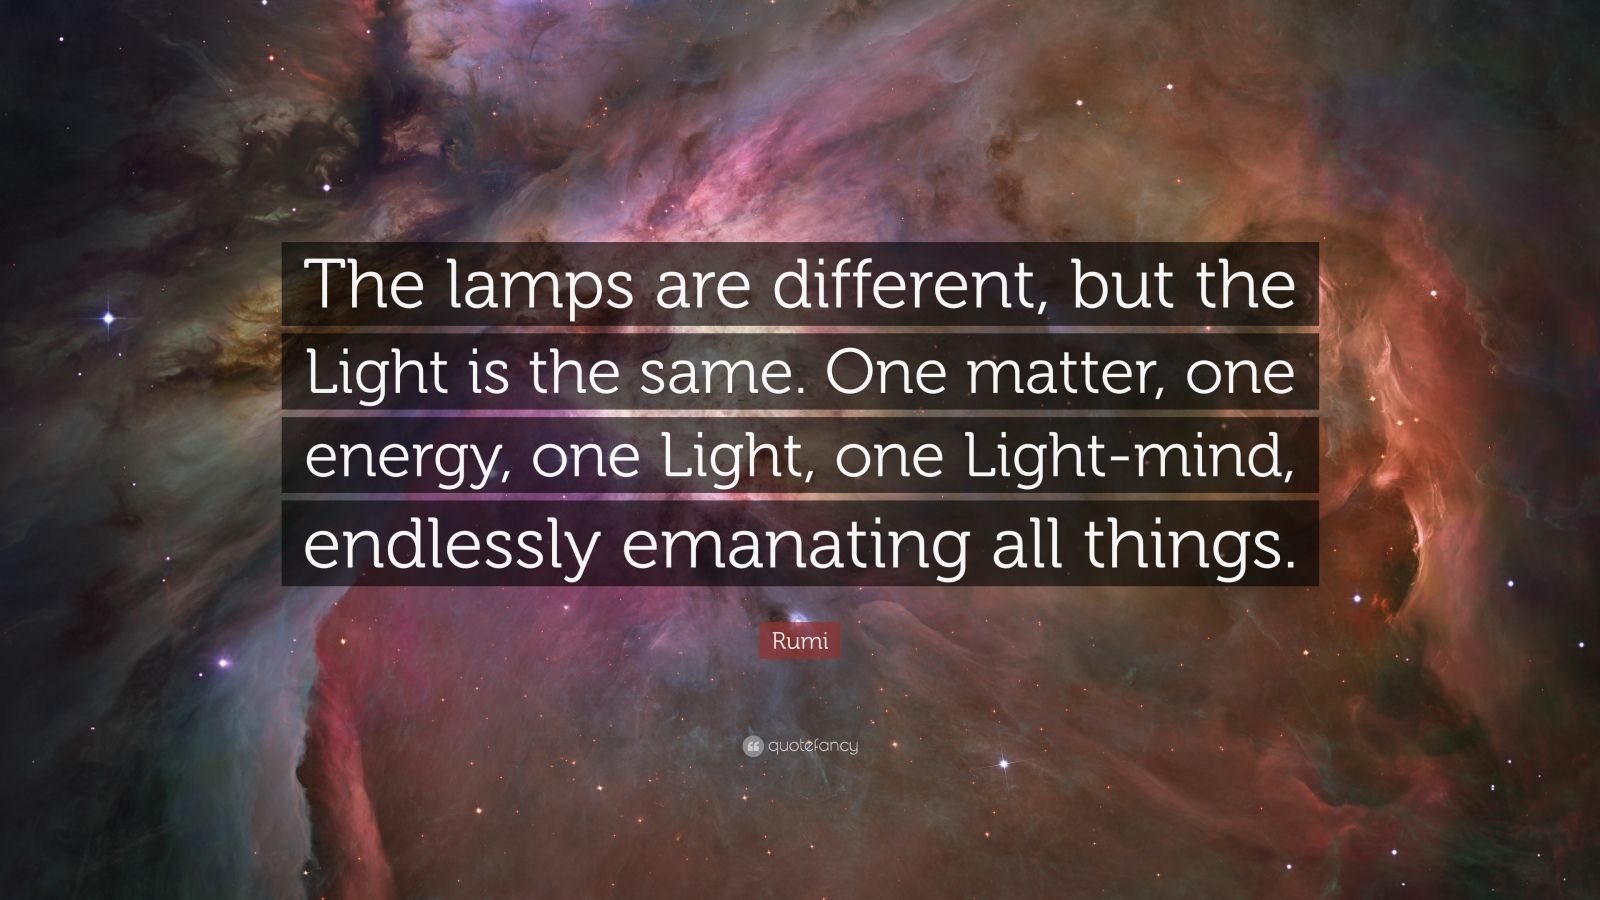 Rumi Quote: “The lamps are different, but the Light is the same. One